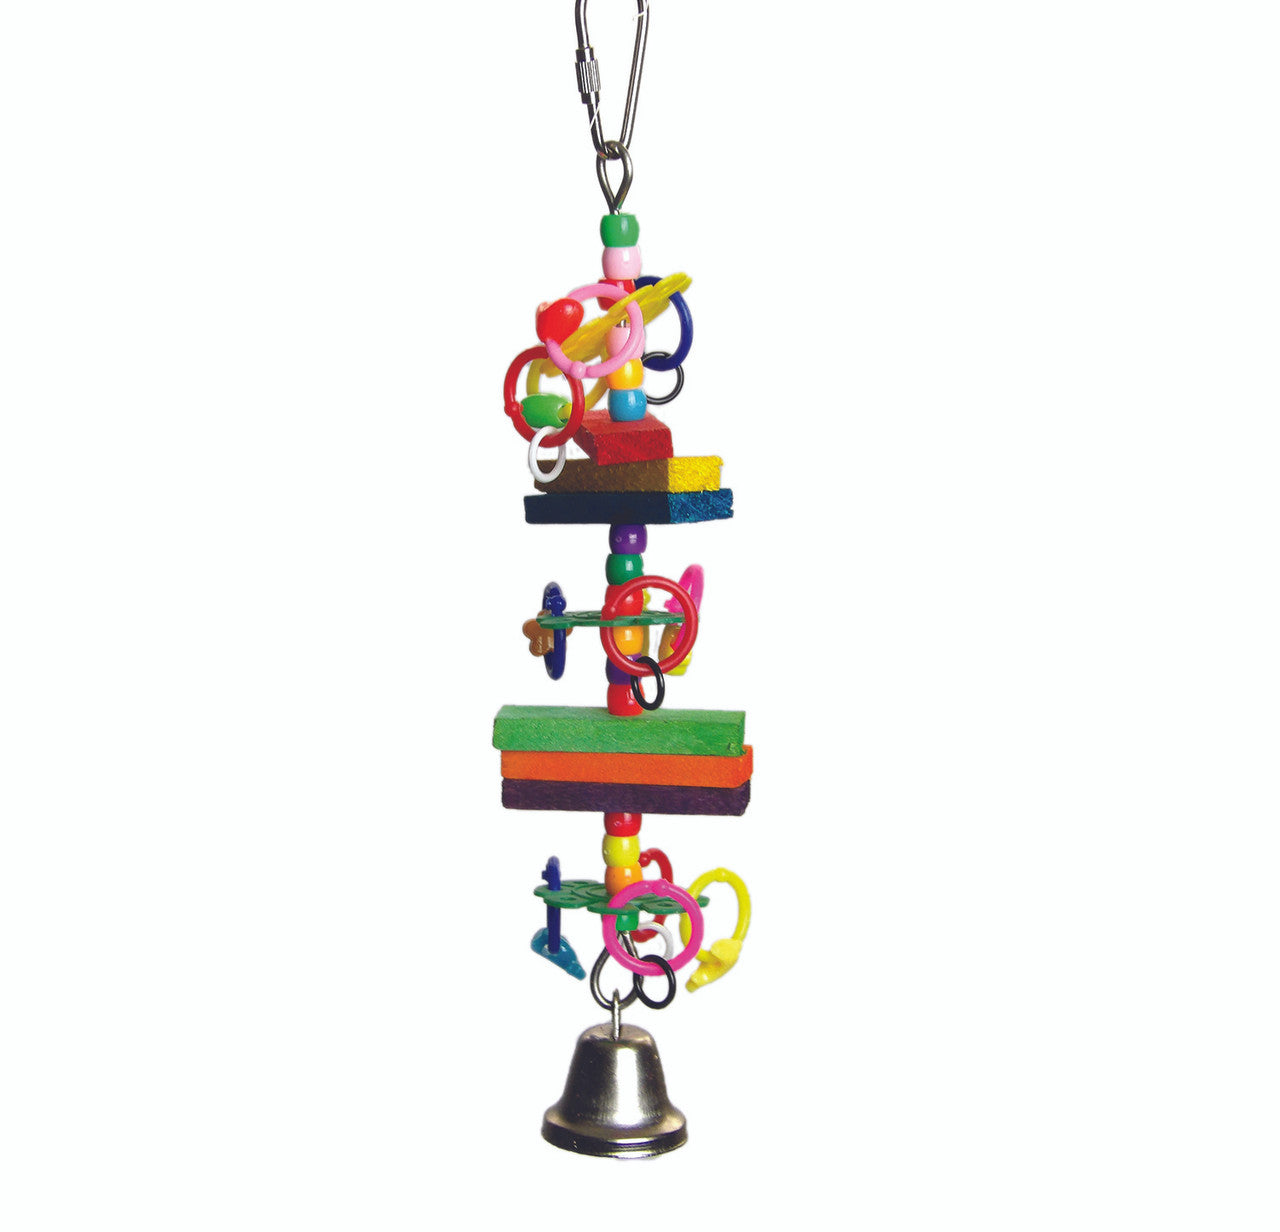 A & E Cages Beads and Blocks Bird Toy